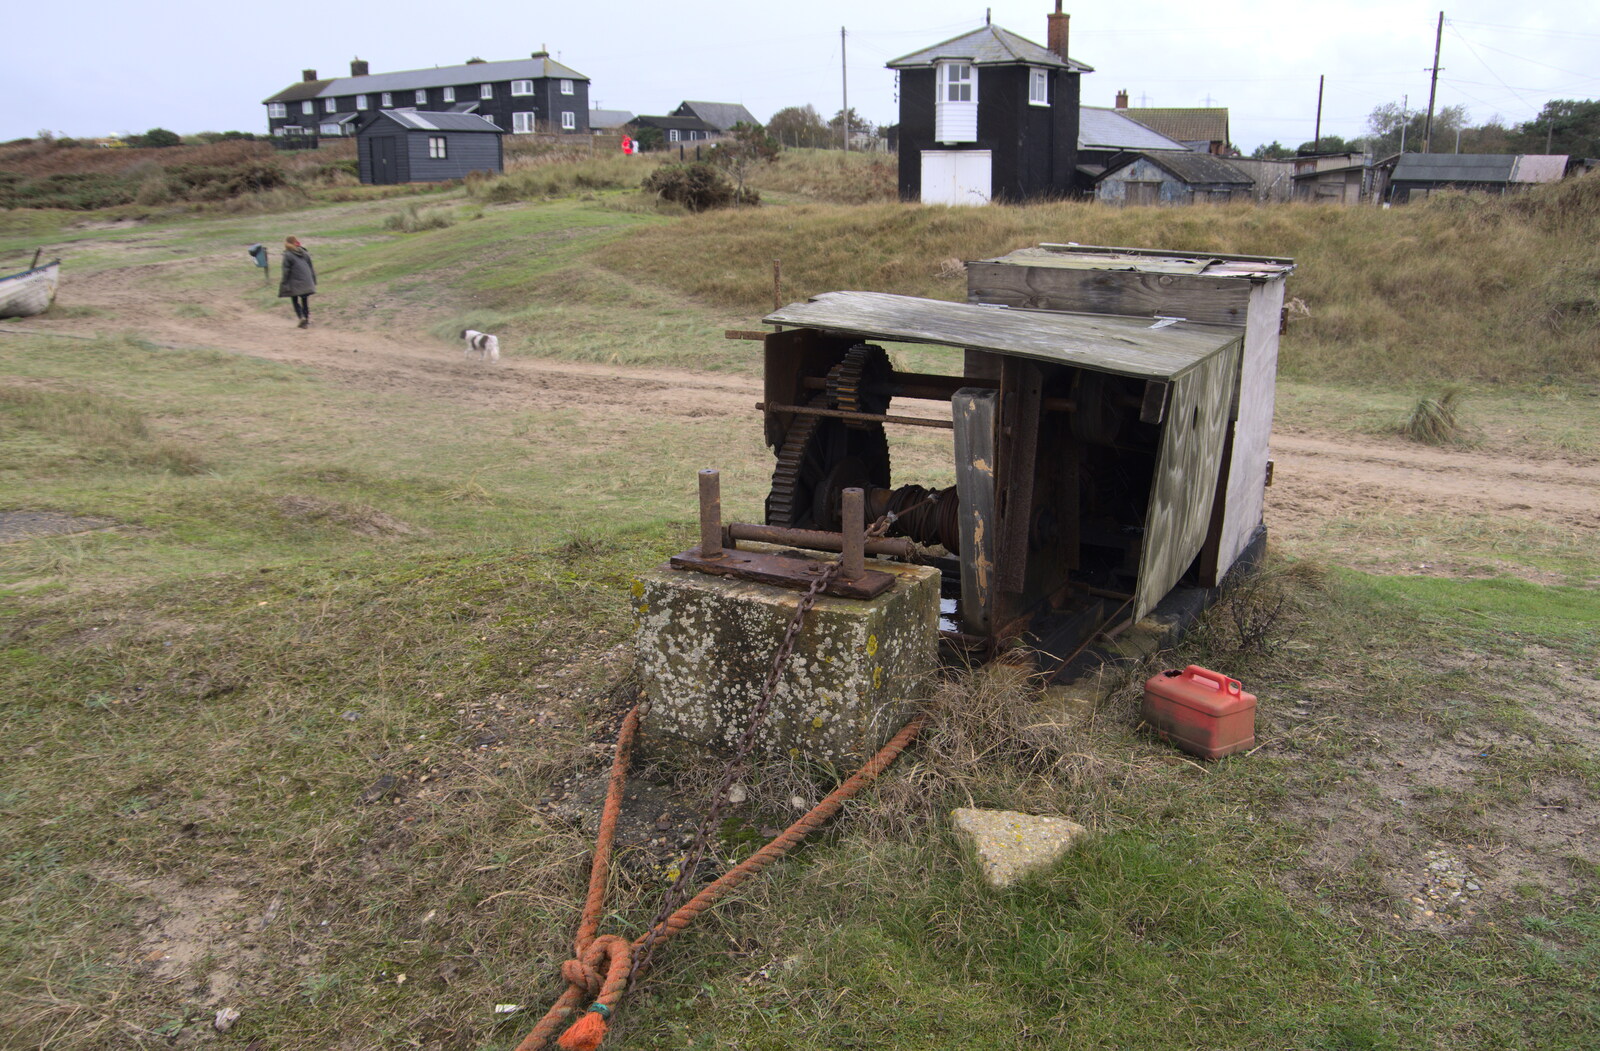 A derelict boat winch from Sizewell Beach and the Lion Pub, Sizewell and Theberton, Suffolk - 4th October 2020